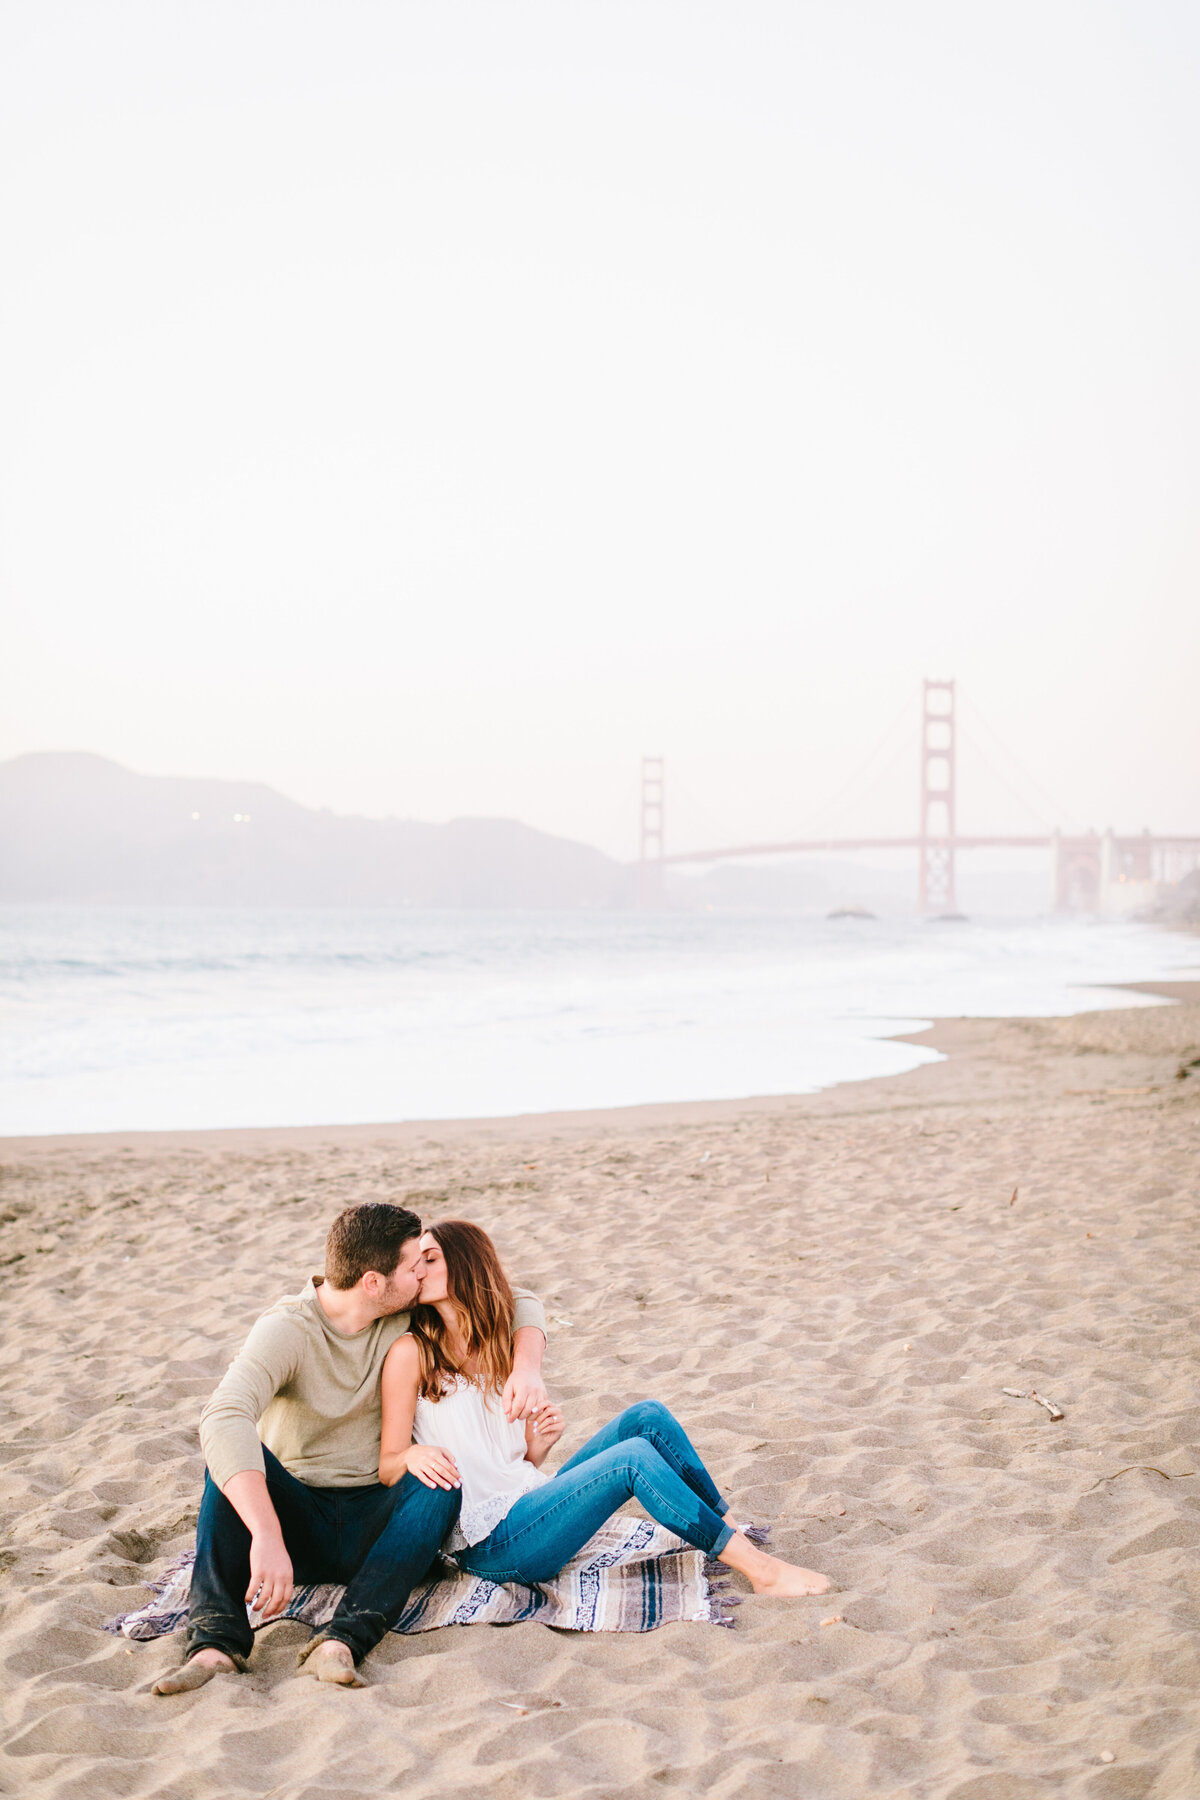 Best California and Texas Engagement Photographer-Jodee Debes Photography-10